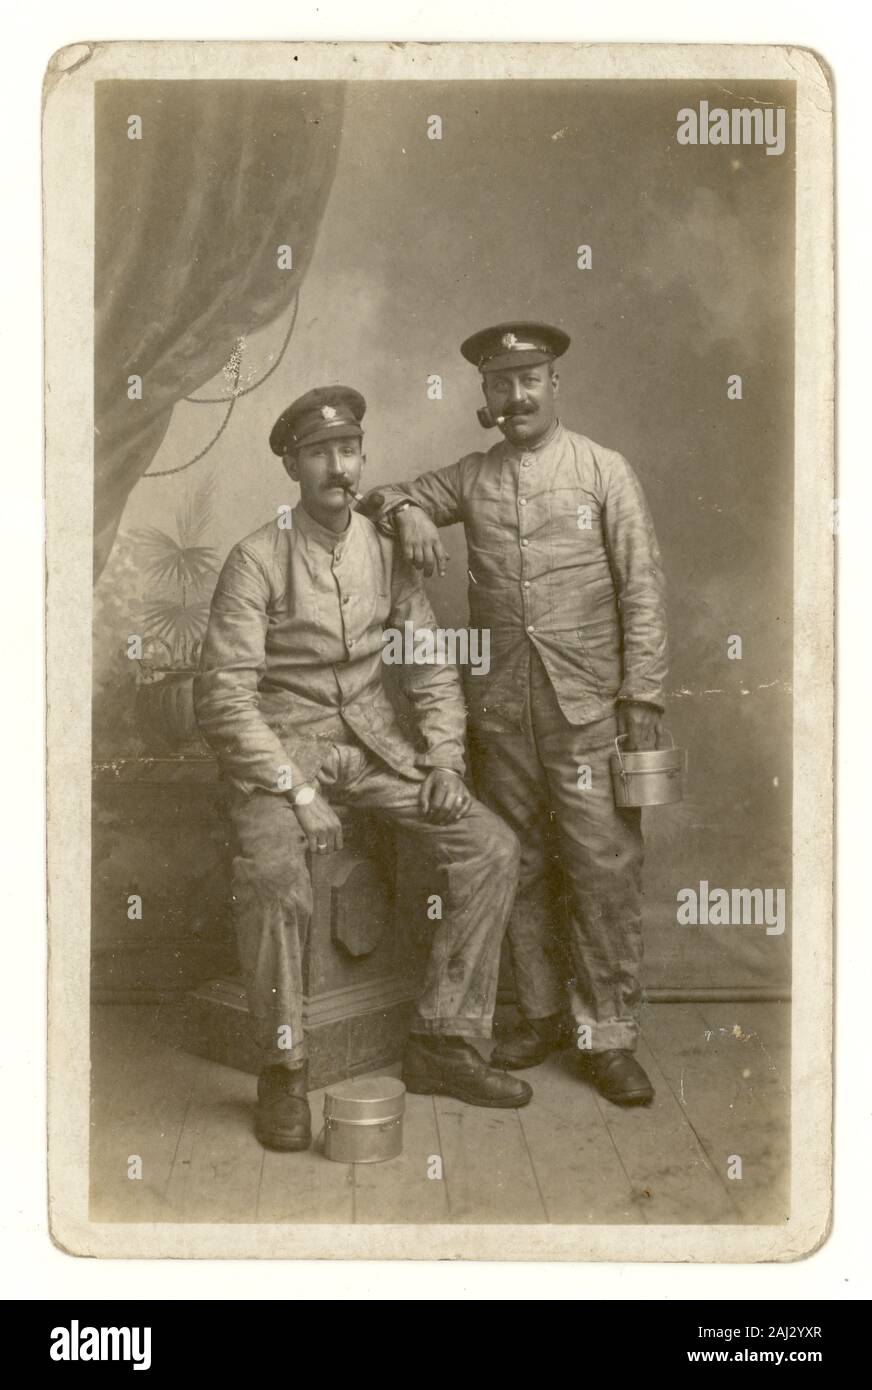 Original WW1 era portrait postcard of two cheerful men in the British Army Service Corps (ASC) at the Front in France. The friends are wearing fatigues and caps wearing the ASC badge, and carry a mess tin which may indicate they are soldier regimental cooks working in a field kitchen. Both men are smoking a pipe. U.K. date on reverse is 27 November 1917 and was sent from the Front in France. Stock Photo